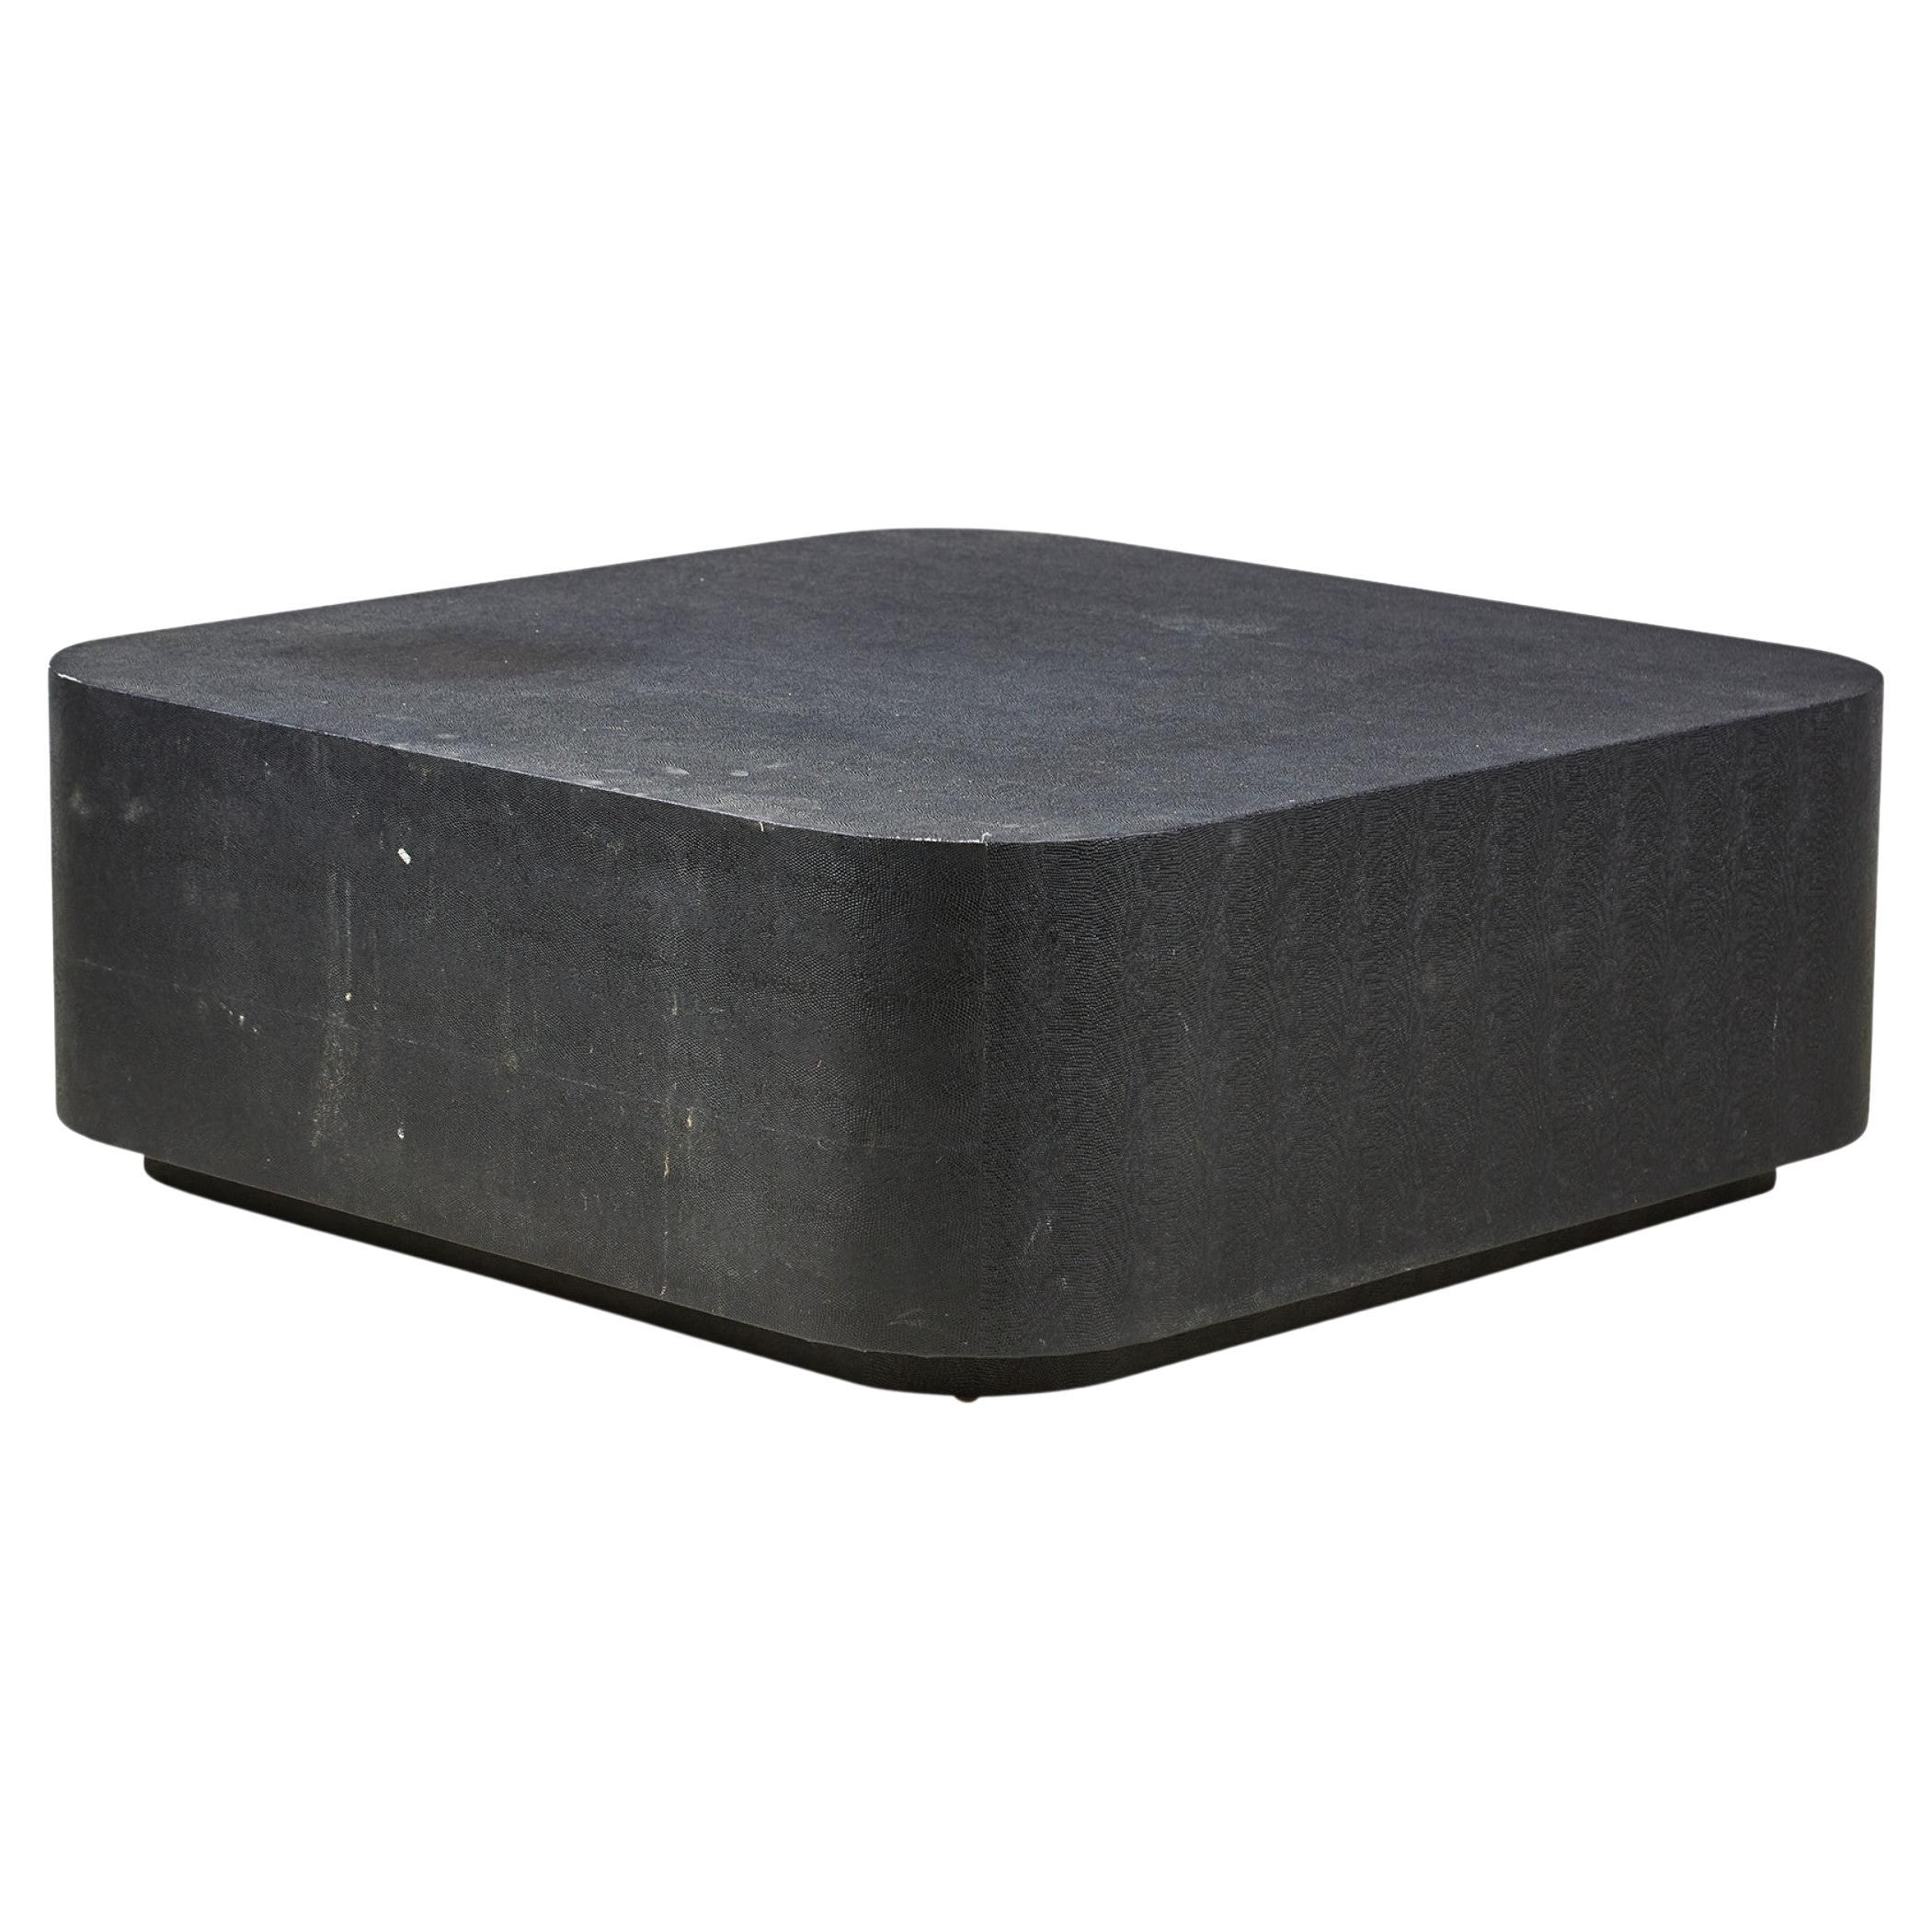 Black Faux Shagreen Square Coffee / Cocktail Table (manner of Karl Springer) For Sale